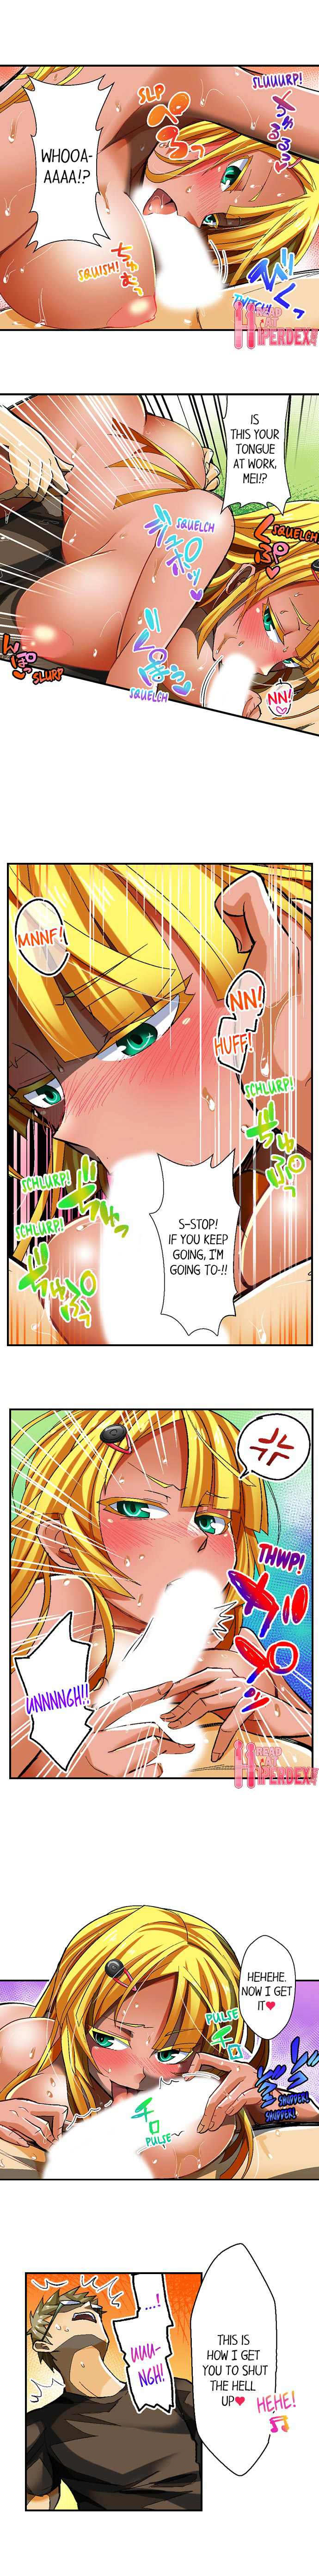 Sex With a Tanned Girl in a Bathhouse - Chapter 6 Page 5